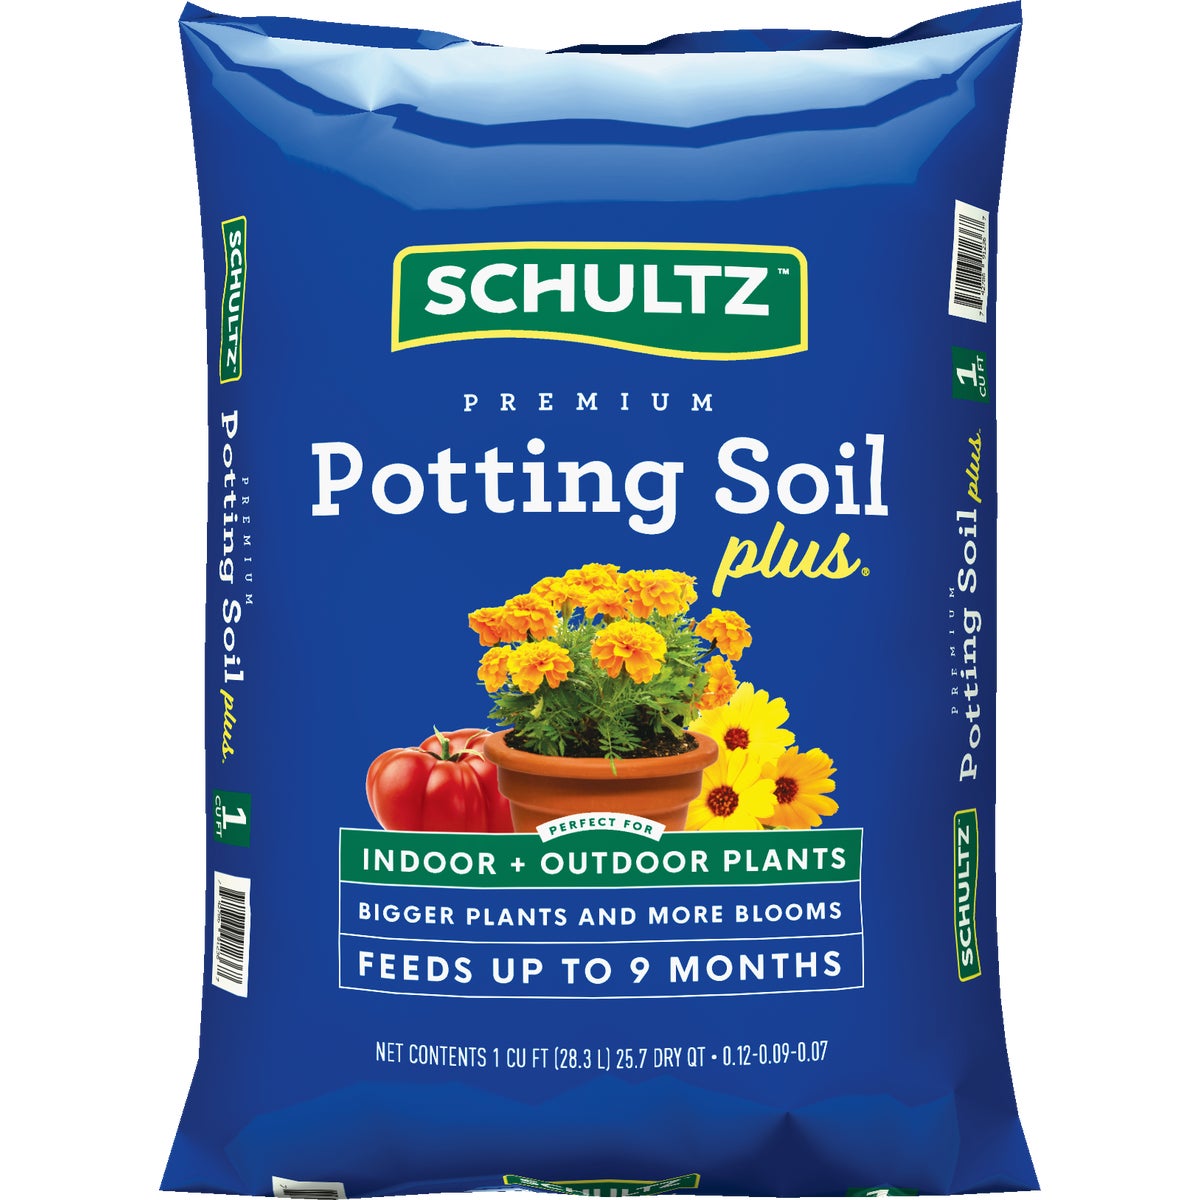 Item 704286, Premium potting soil ideal for indoor and outdoor plants.